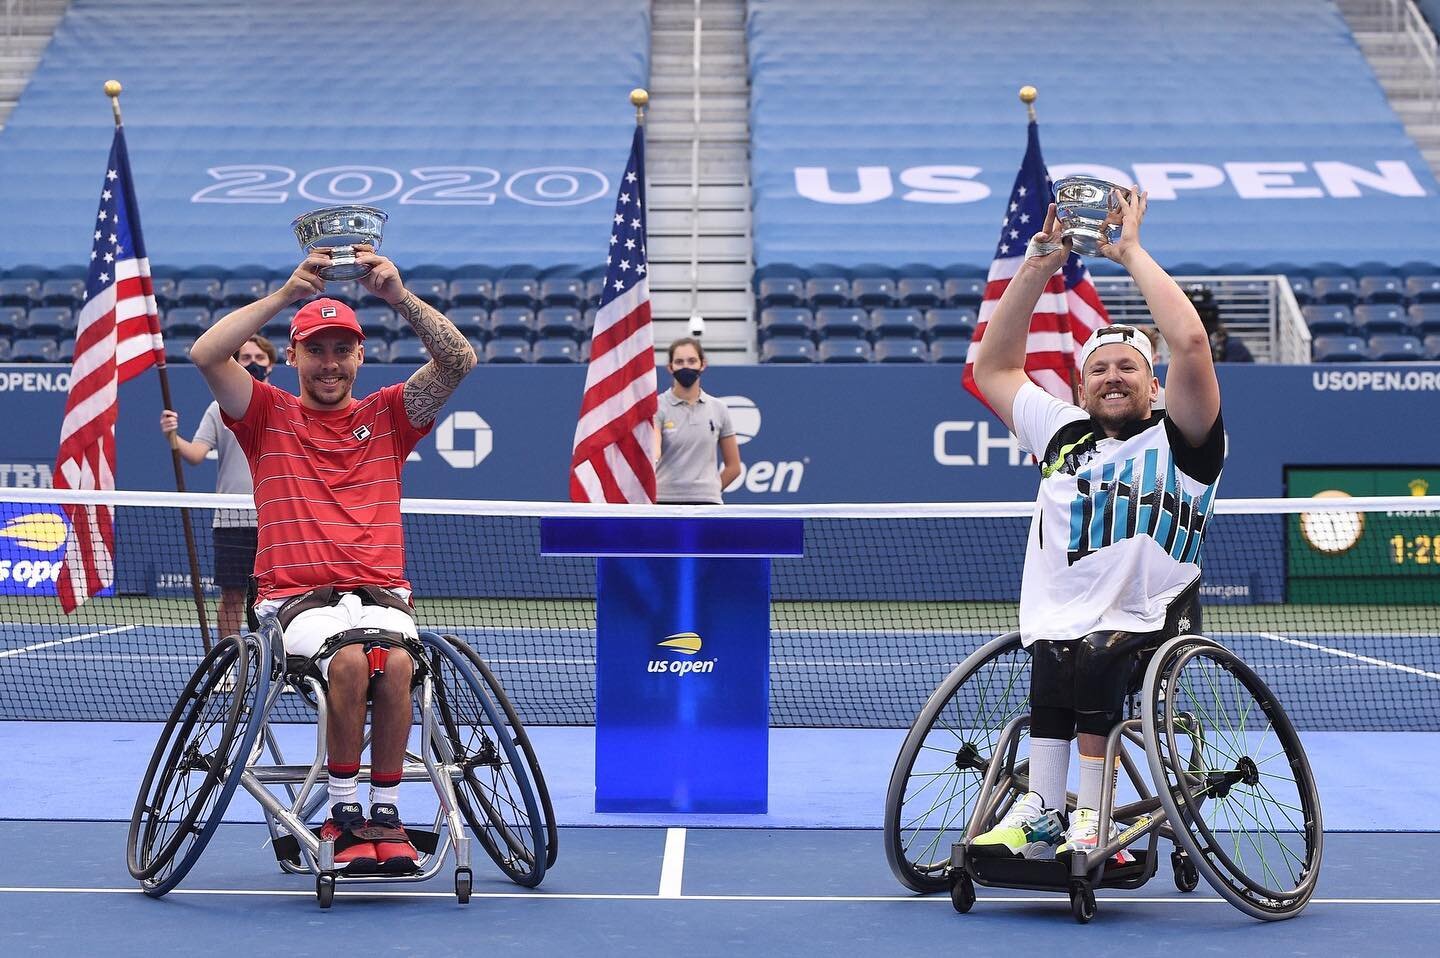 🏆17 
🏆18
🏆19
🏆20 
Quad doubles champion @usopen with 2 different partners over the years. Didn&rsquo;t go my way in singles but we come back bigger and stronger next time. Thanks for all the support as always. #usopen